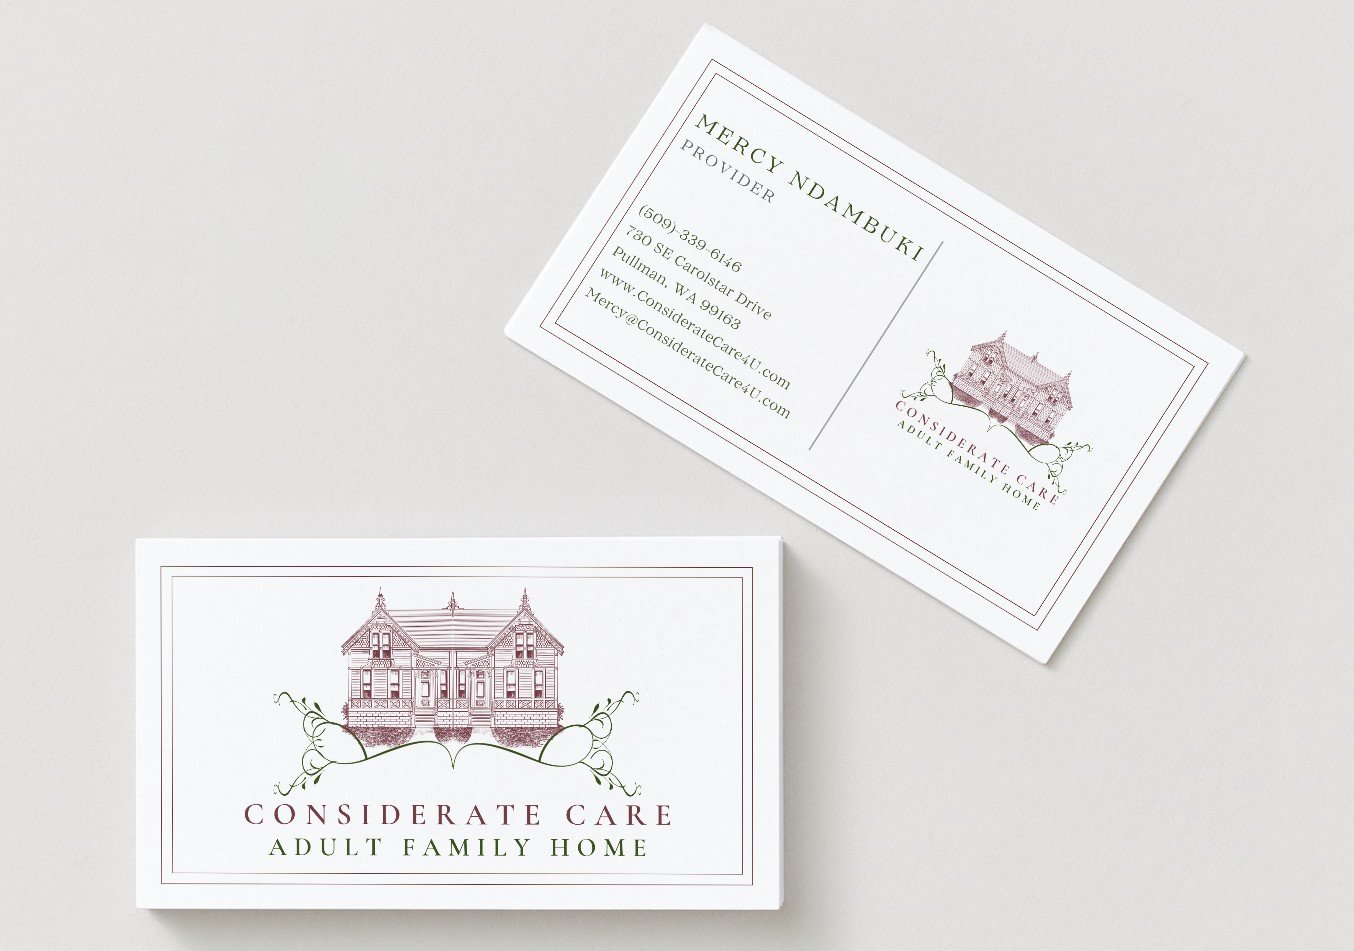 21051401 - Considerate Care AFH - Business Cards  - Front & Back.jpg